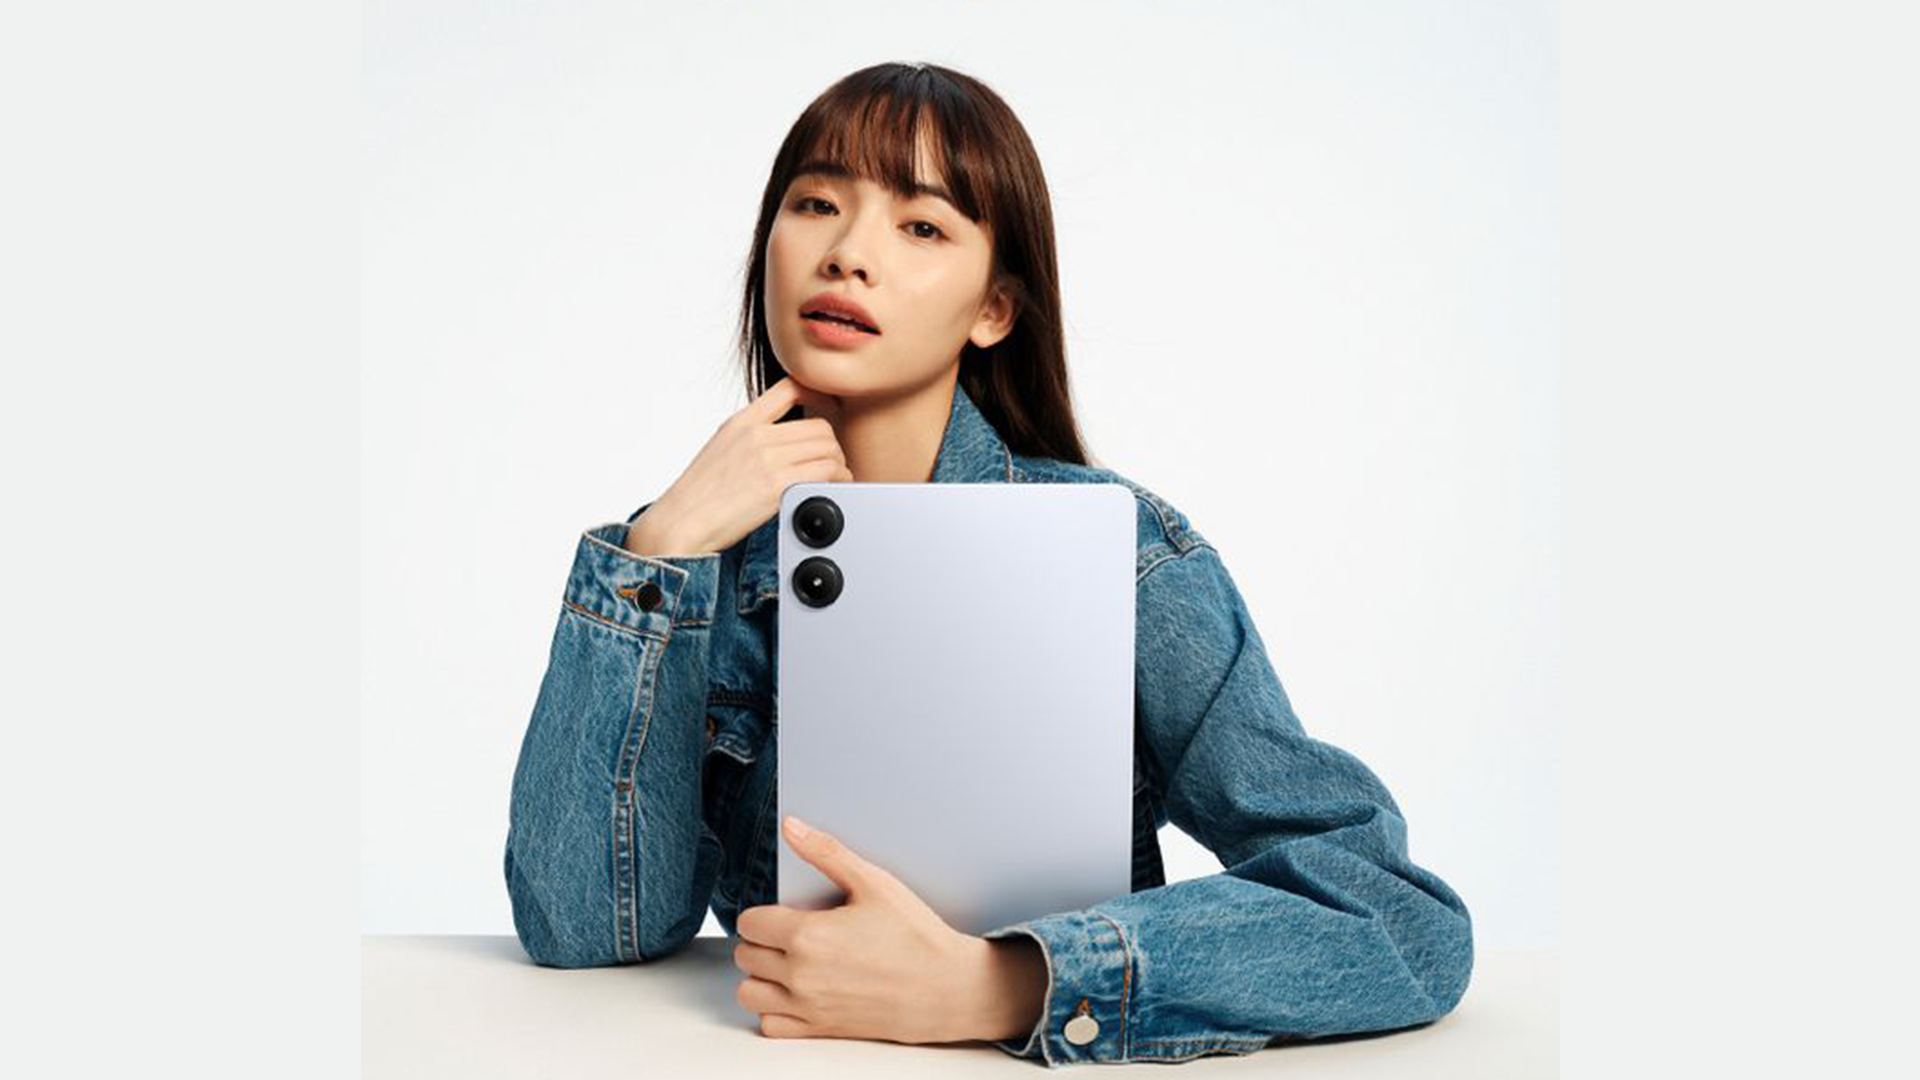 Redmi Pad Pro: Xiaomi's new tablet has visuals and details revealed - CanalJMS - Technology, launches, reviews and tips!